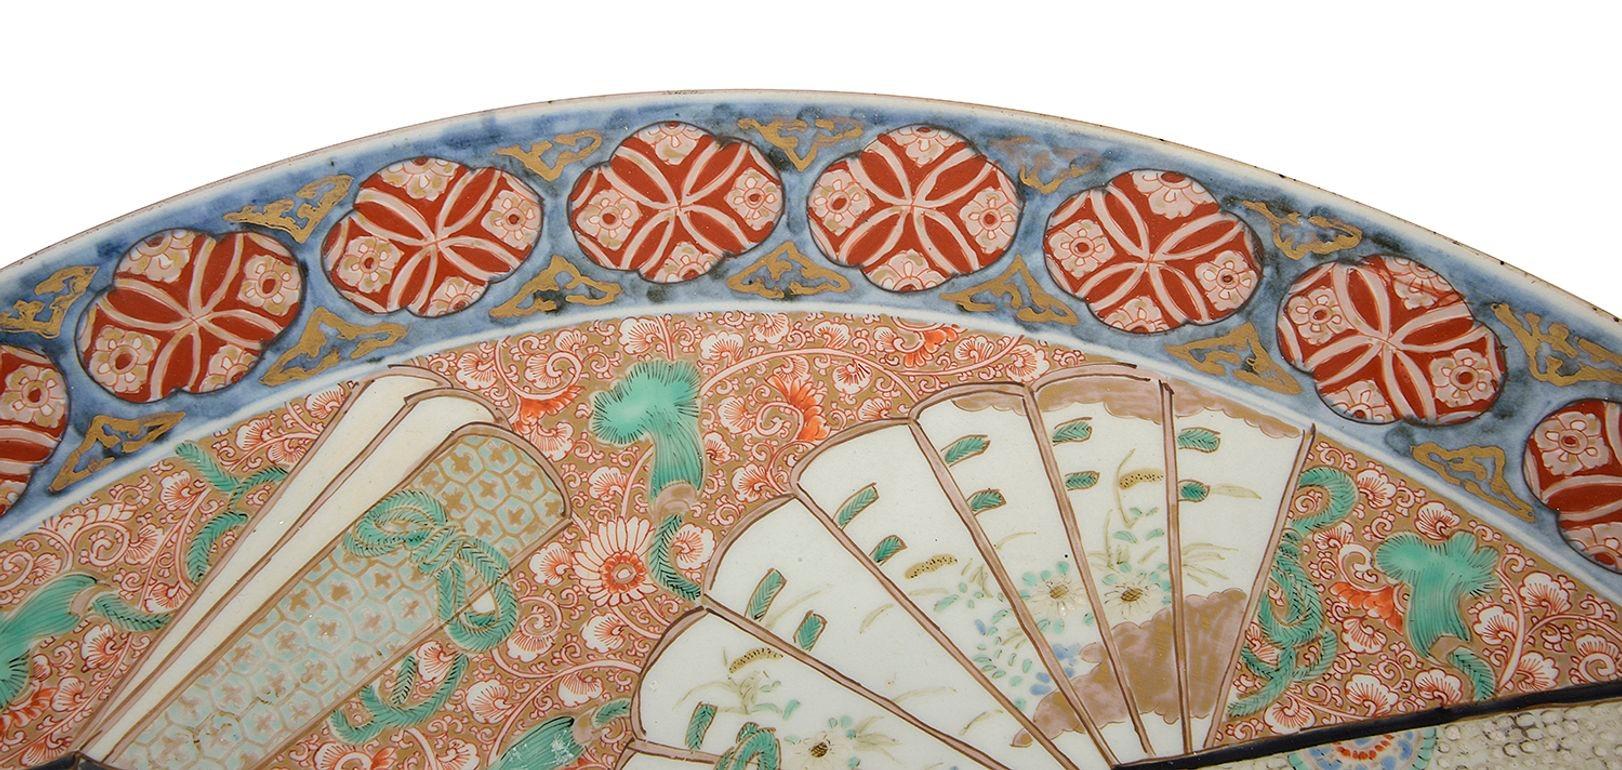 A very good quality late 19th Century Japanese Imari porcelain, hand painted charger depicting a six fold screen with a men on horse back in a rural mountainous setting. Fans, floral and motif decoration to the boarders.
Batch 76 G2167/5 SANK